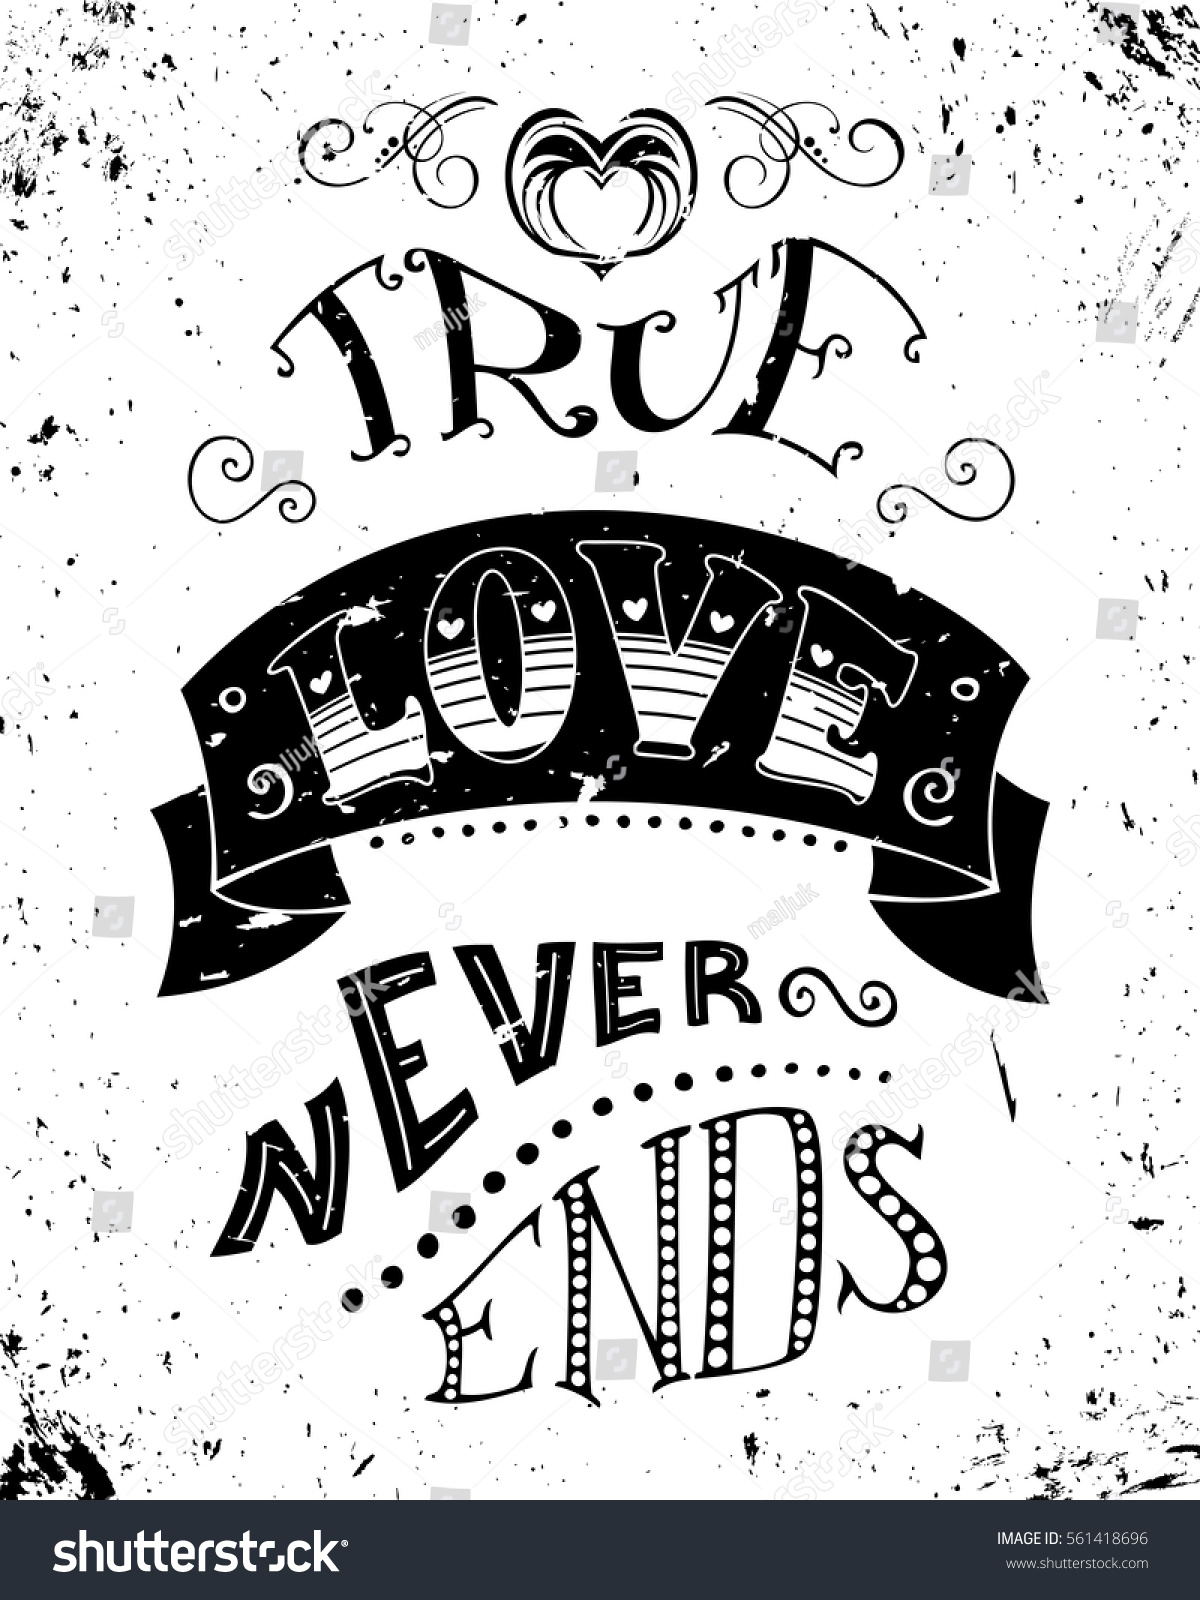 True love never ends Romantic quote on grunge white background Vintage hand lettering